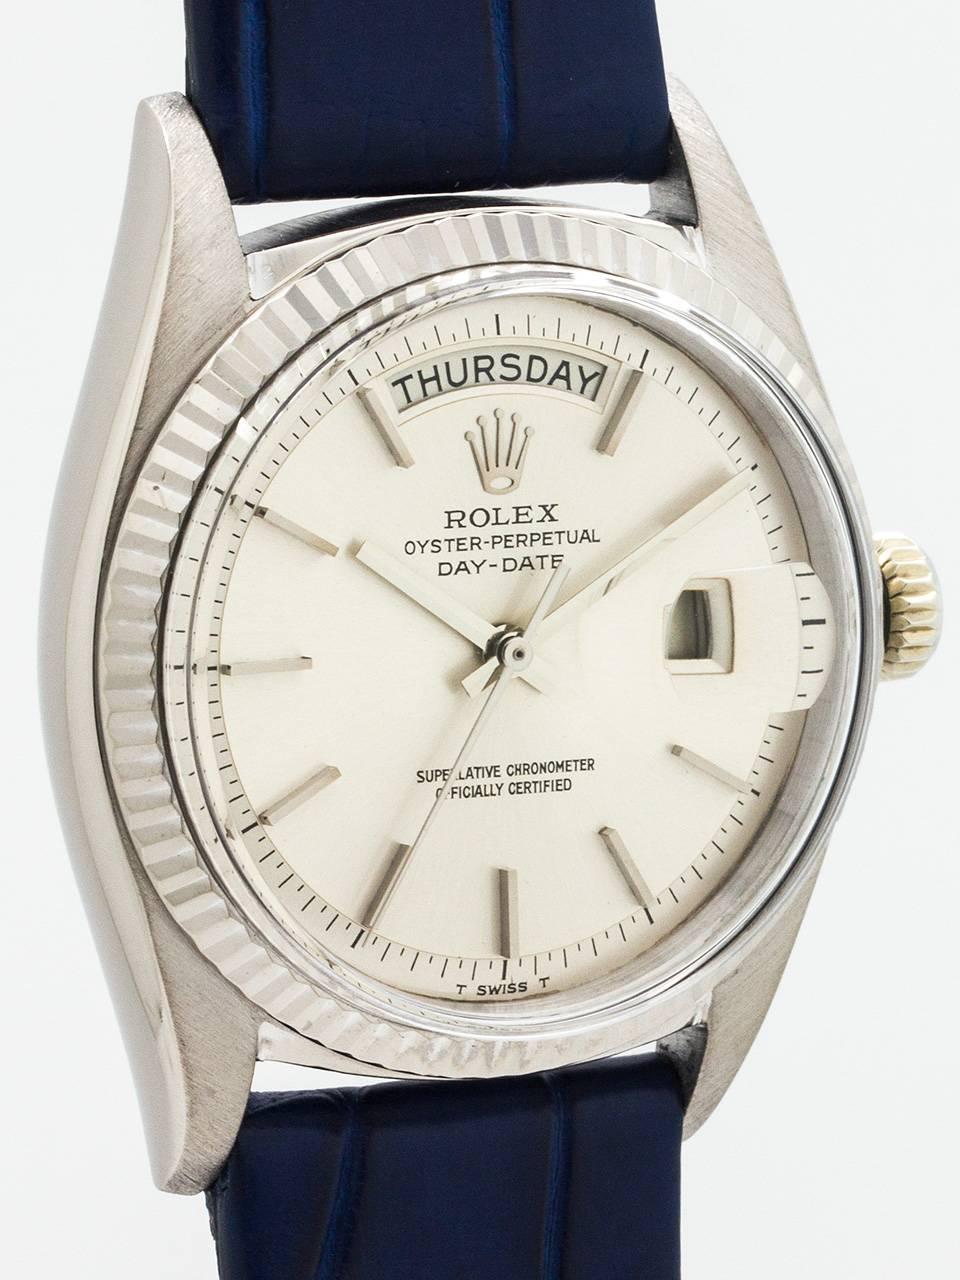 Vintage Rolex Day-Date ref 1807 circa 1969. Featuring 36mm diameter 18K white gold case with fluted bezel and acrylic crystal.  This example features a particularly robust case with very heavy lugs that have not been over polished in the lifetime of